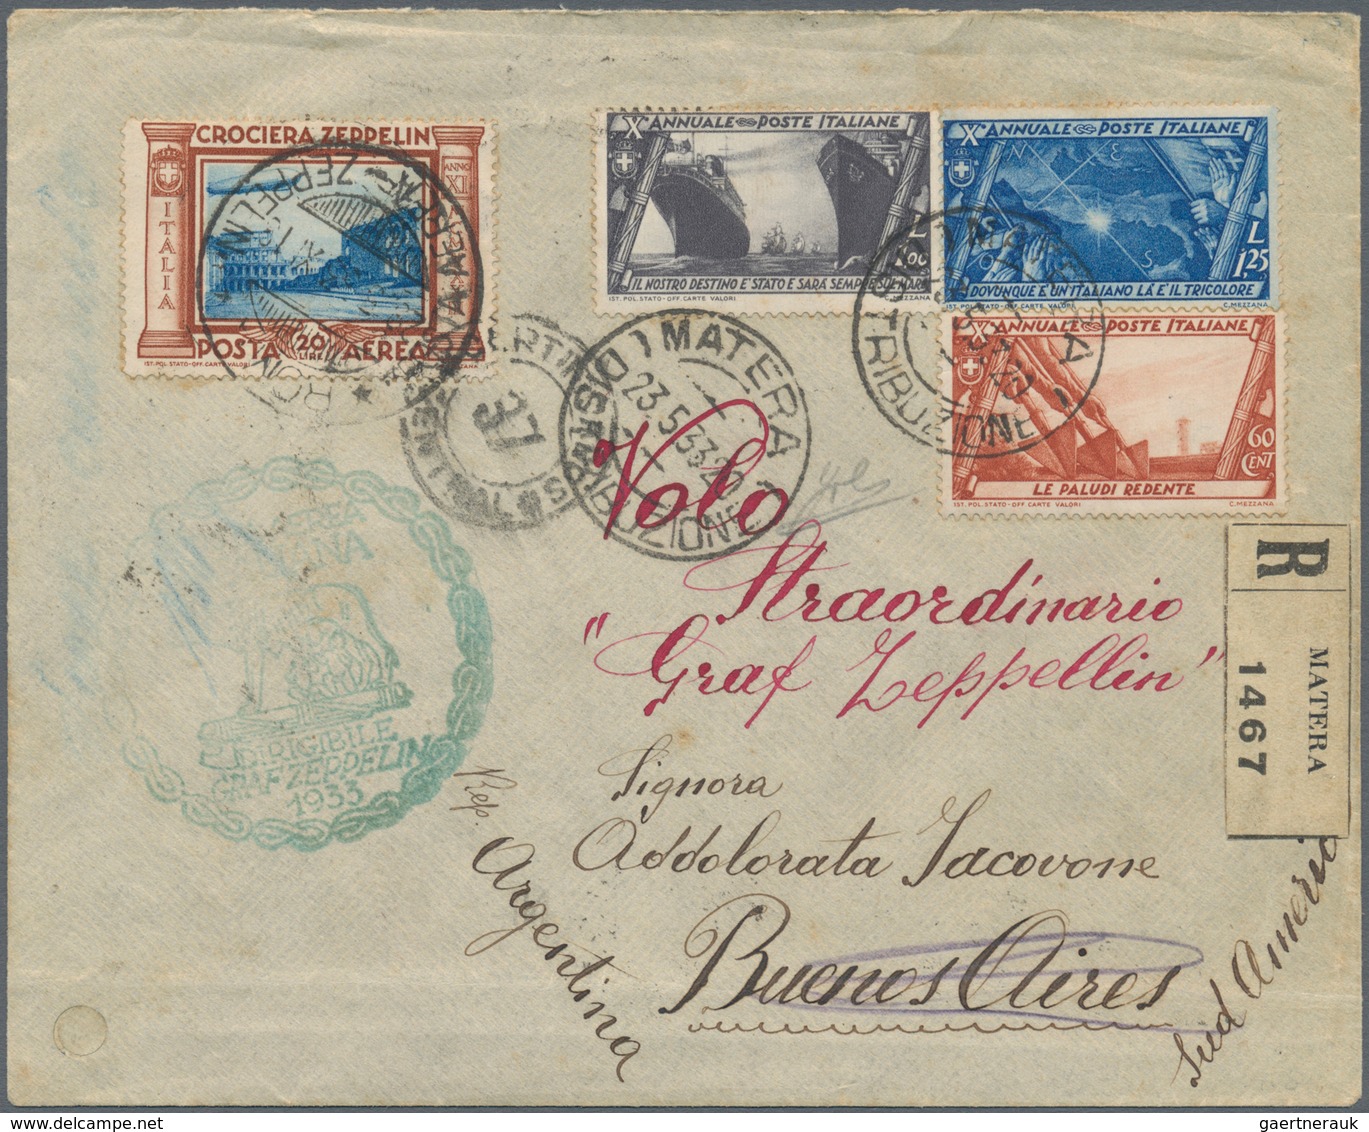 Zeppelinpost Europa: 1933, ITALY TRIP LZ 127, group of 13 covers/cards franked with Italian (12) and